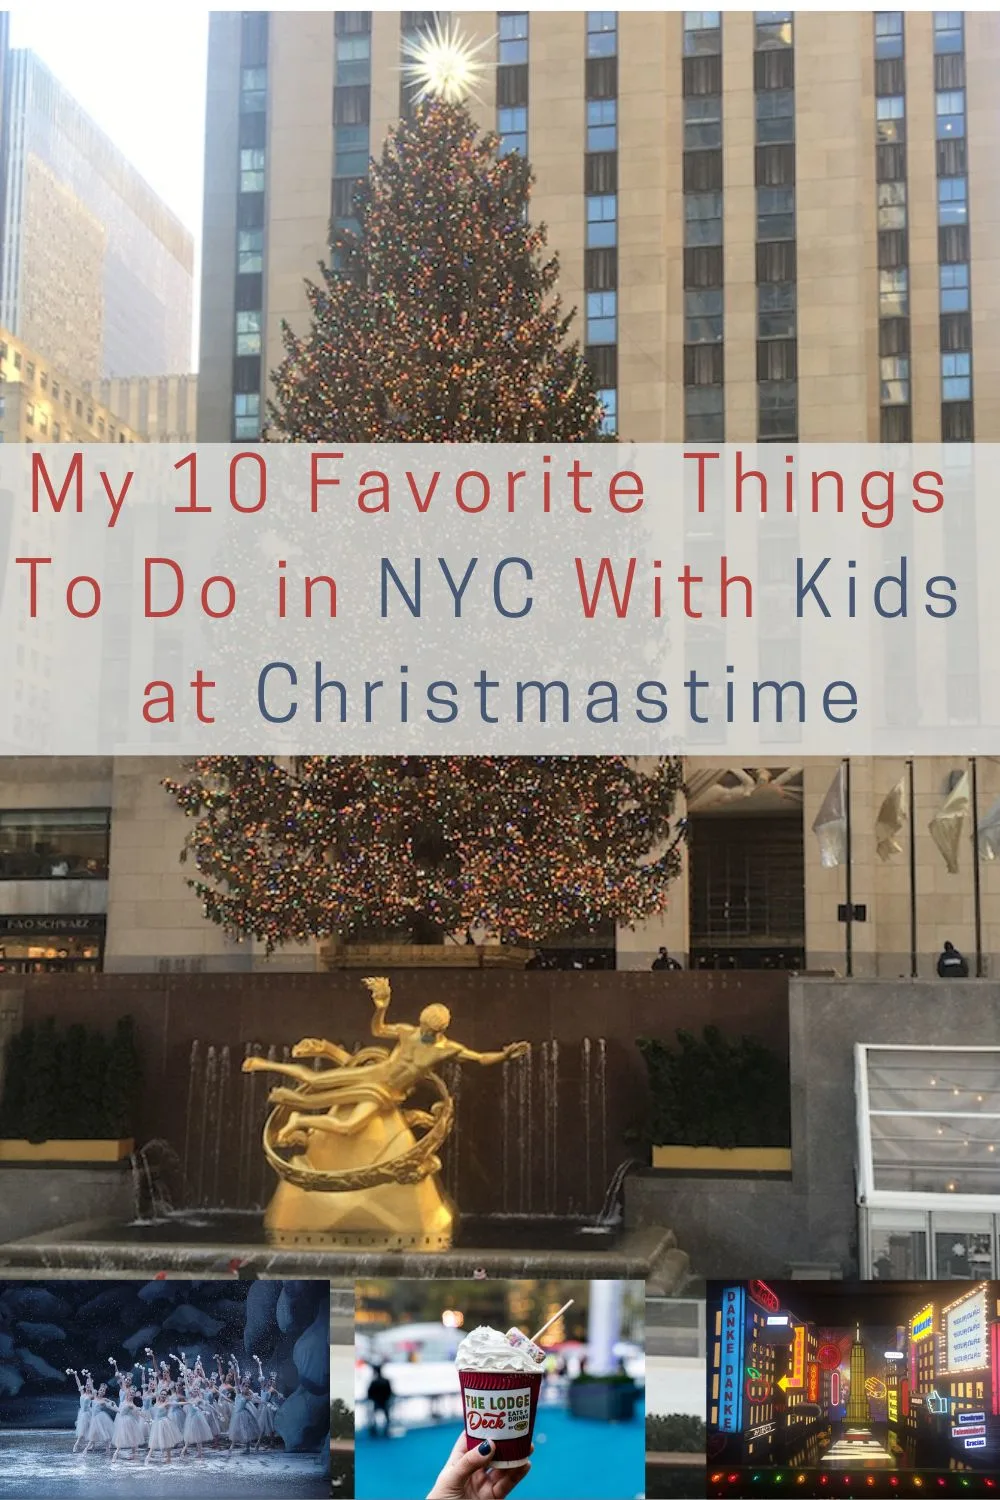 christmas in nyc is amazingly fun. here are 15+ holiday attractions that my family never misses. plus, tips on what to skip during a december visit with kids.